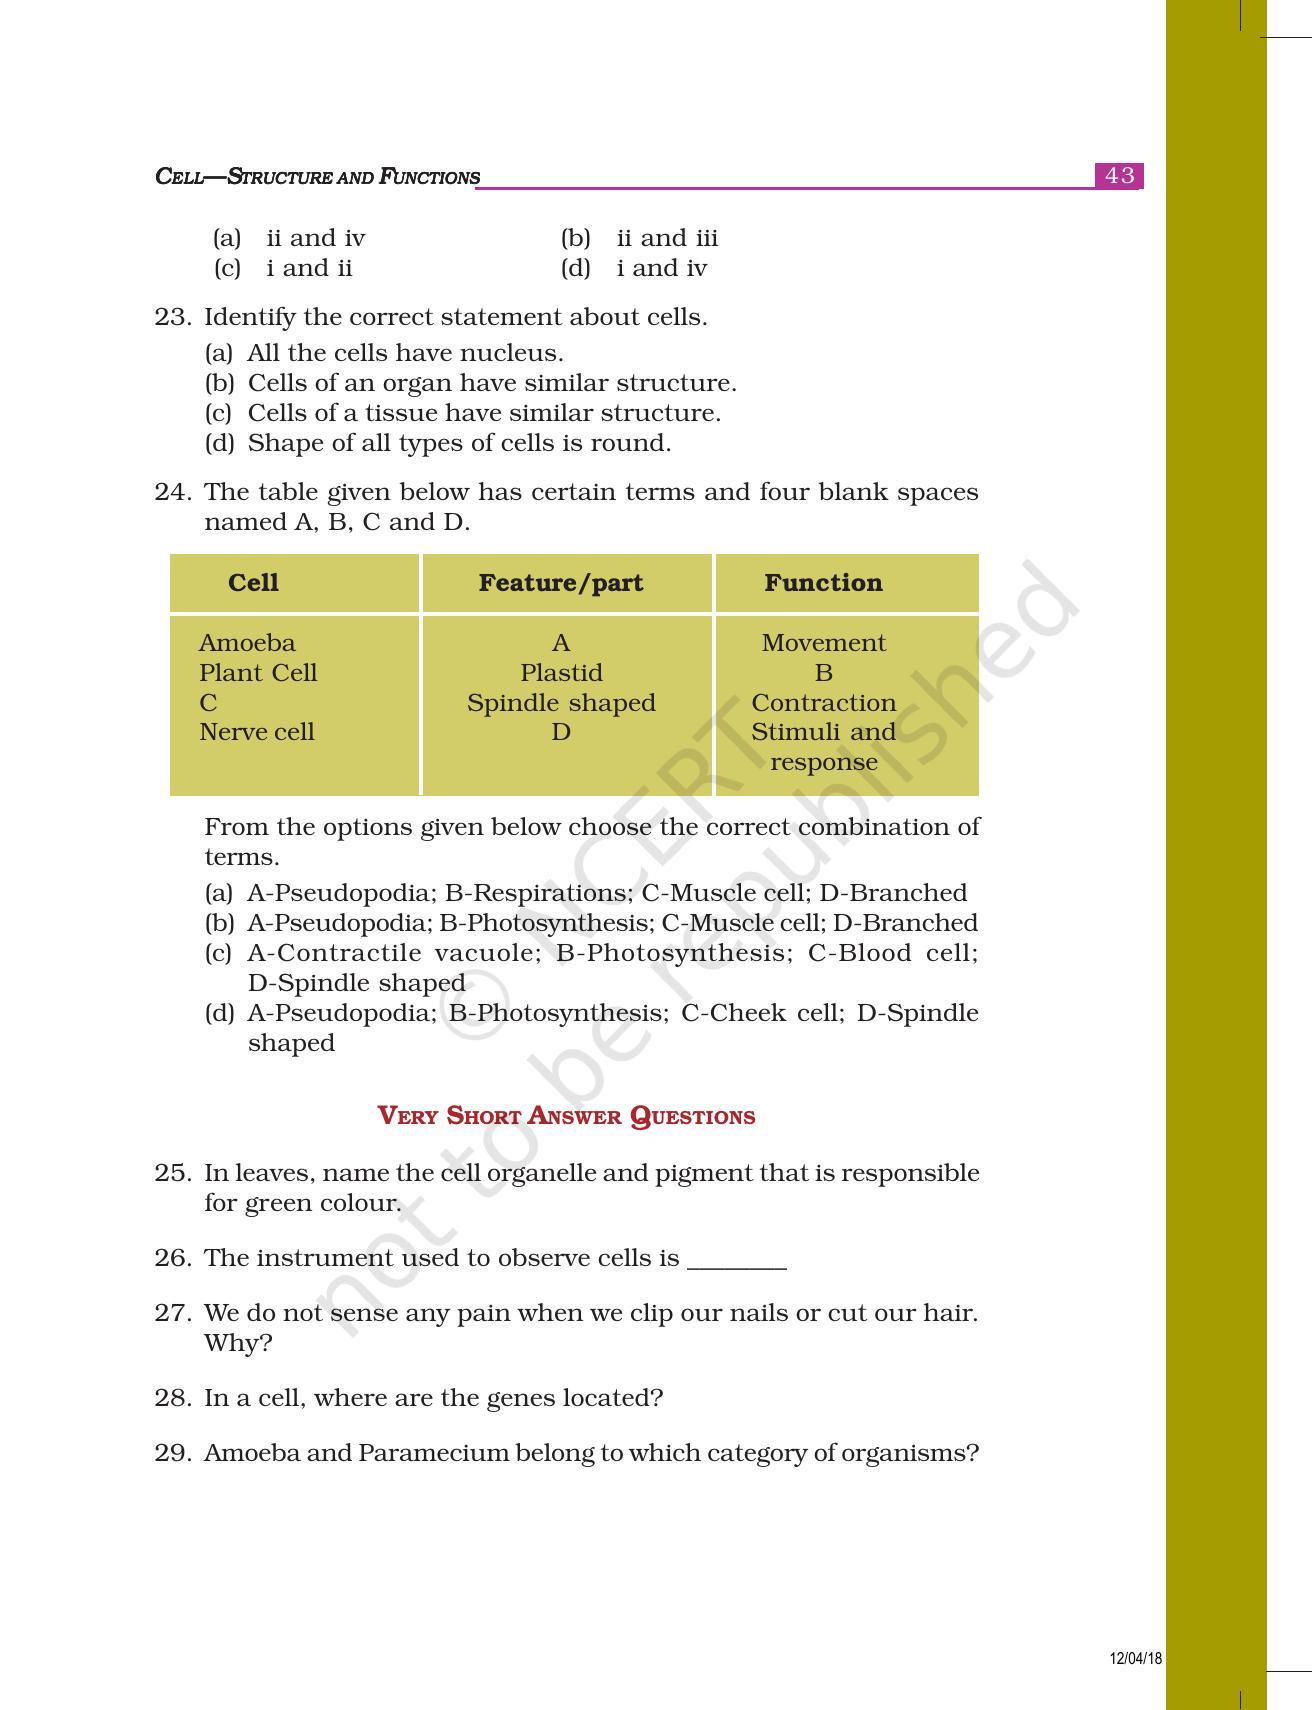 NCERT Exemplar Book for Class 8 Science: Chapter 8- Cell—Structure and Functions - Page 4